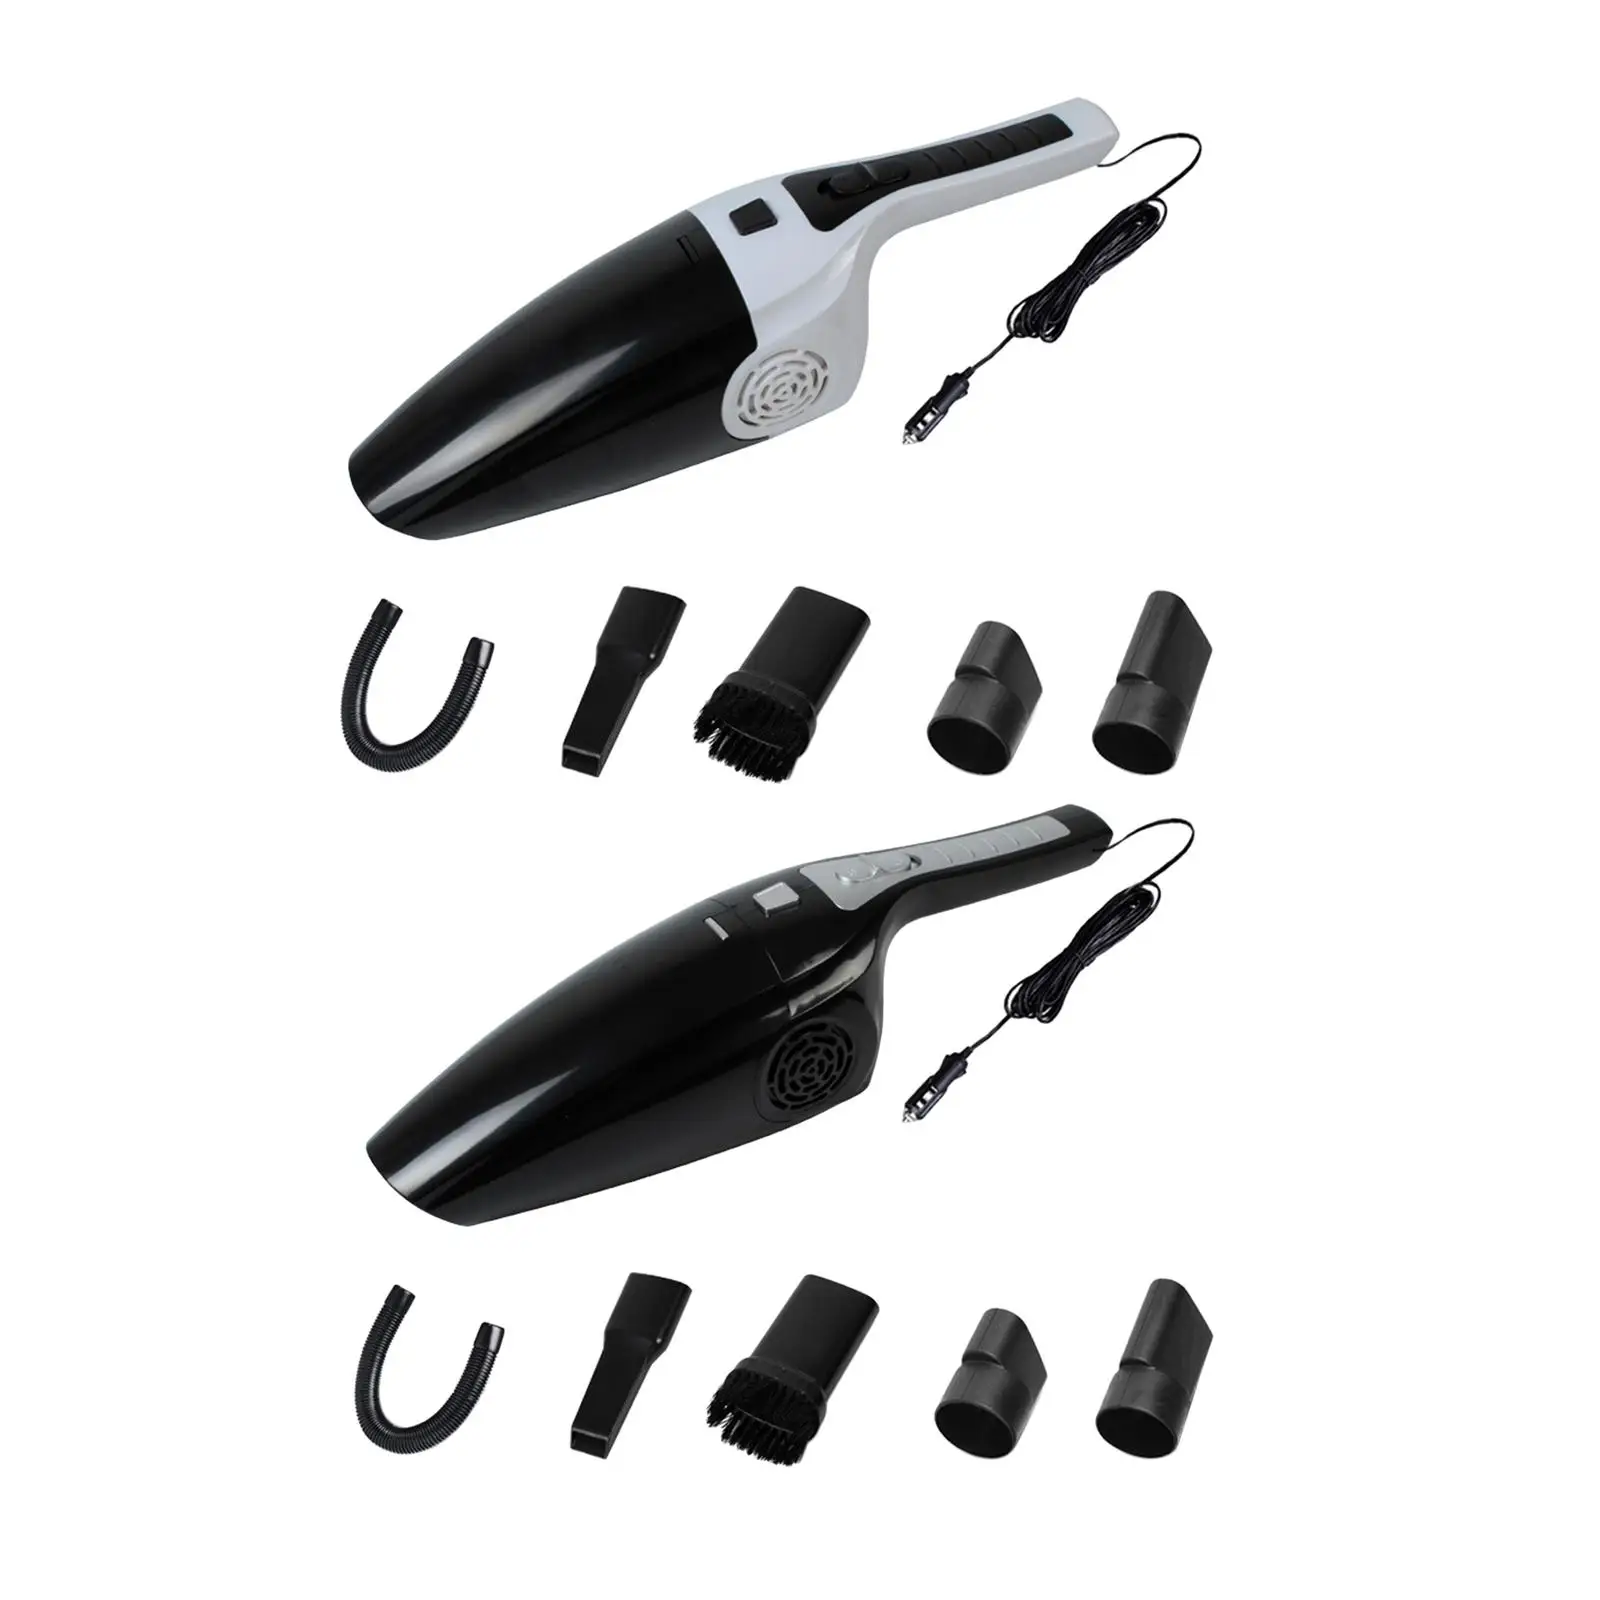 12V Wired Car Vacuum Cleaner with 5 Attachments Handheld Small Strong Suction Wet and  Use Lightweight Auto Accessories